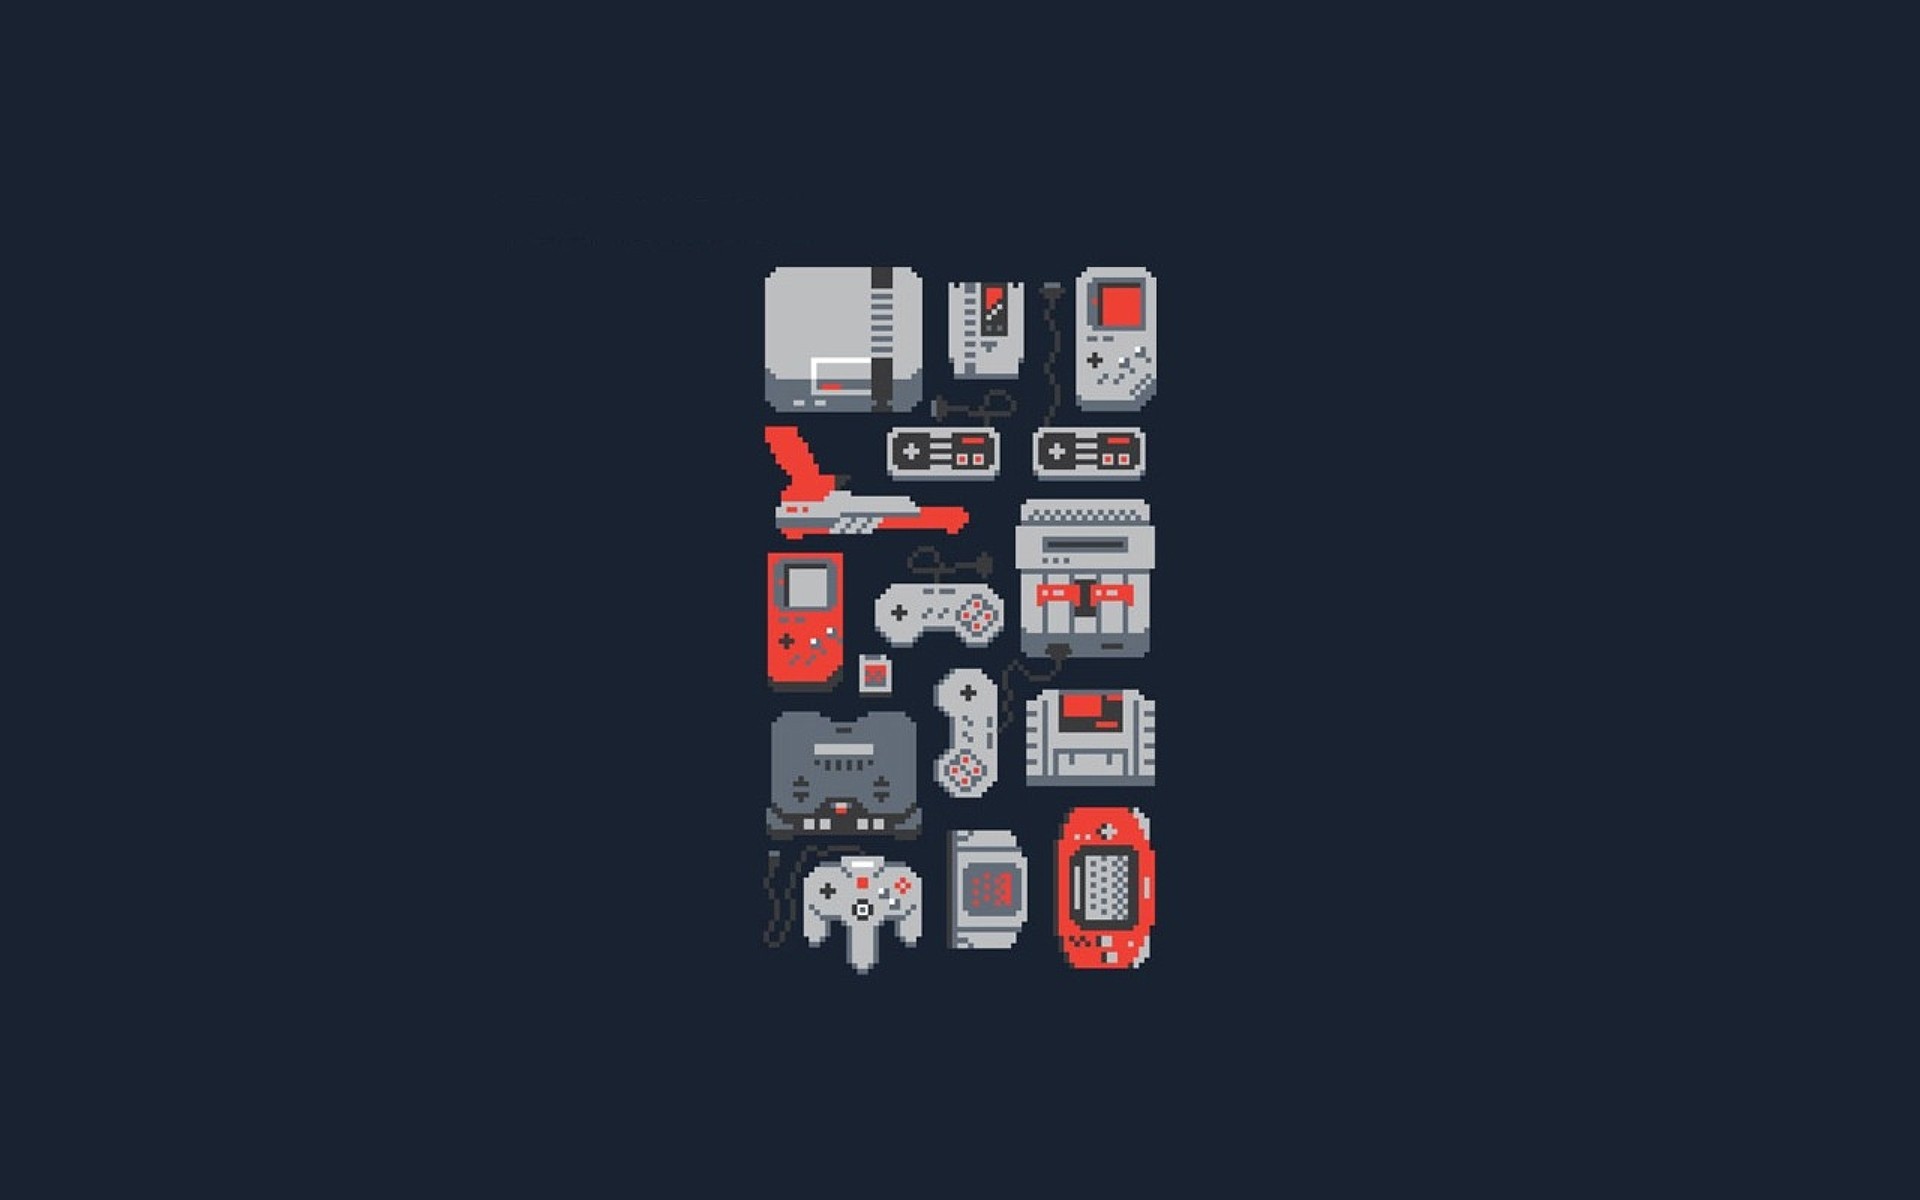 Video Games Consoles Nintendo Entertainment System Snes Gameboy Nintendo 64 Gameboy Advance 8 Bit Minimalism Wallpapers Hd Desktop And Mobile Backgrounds